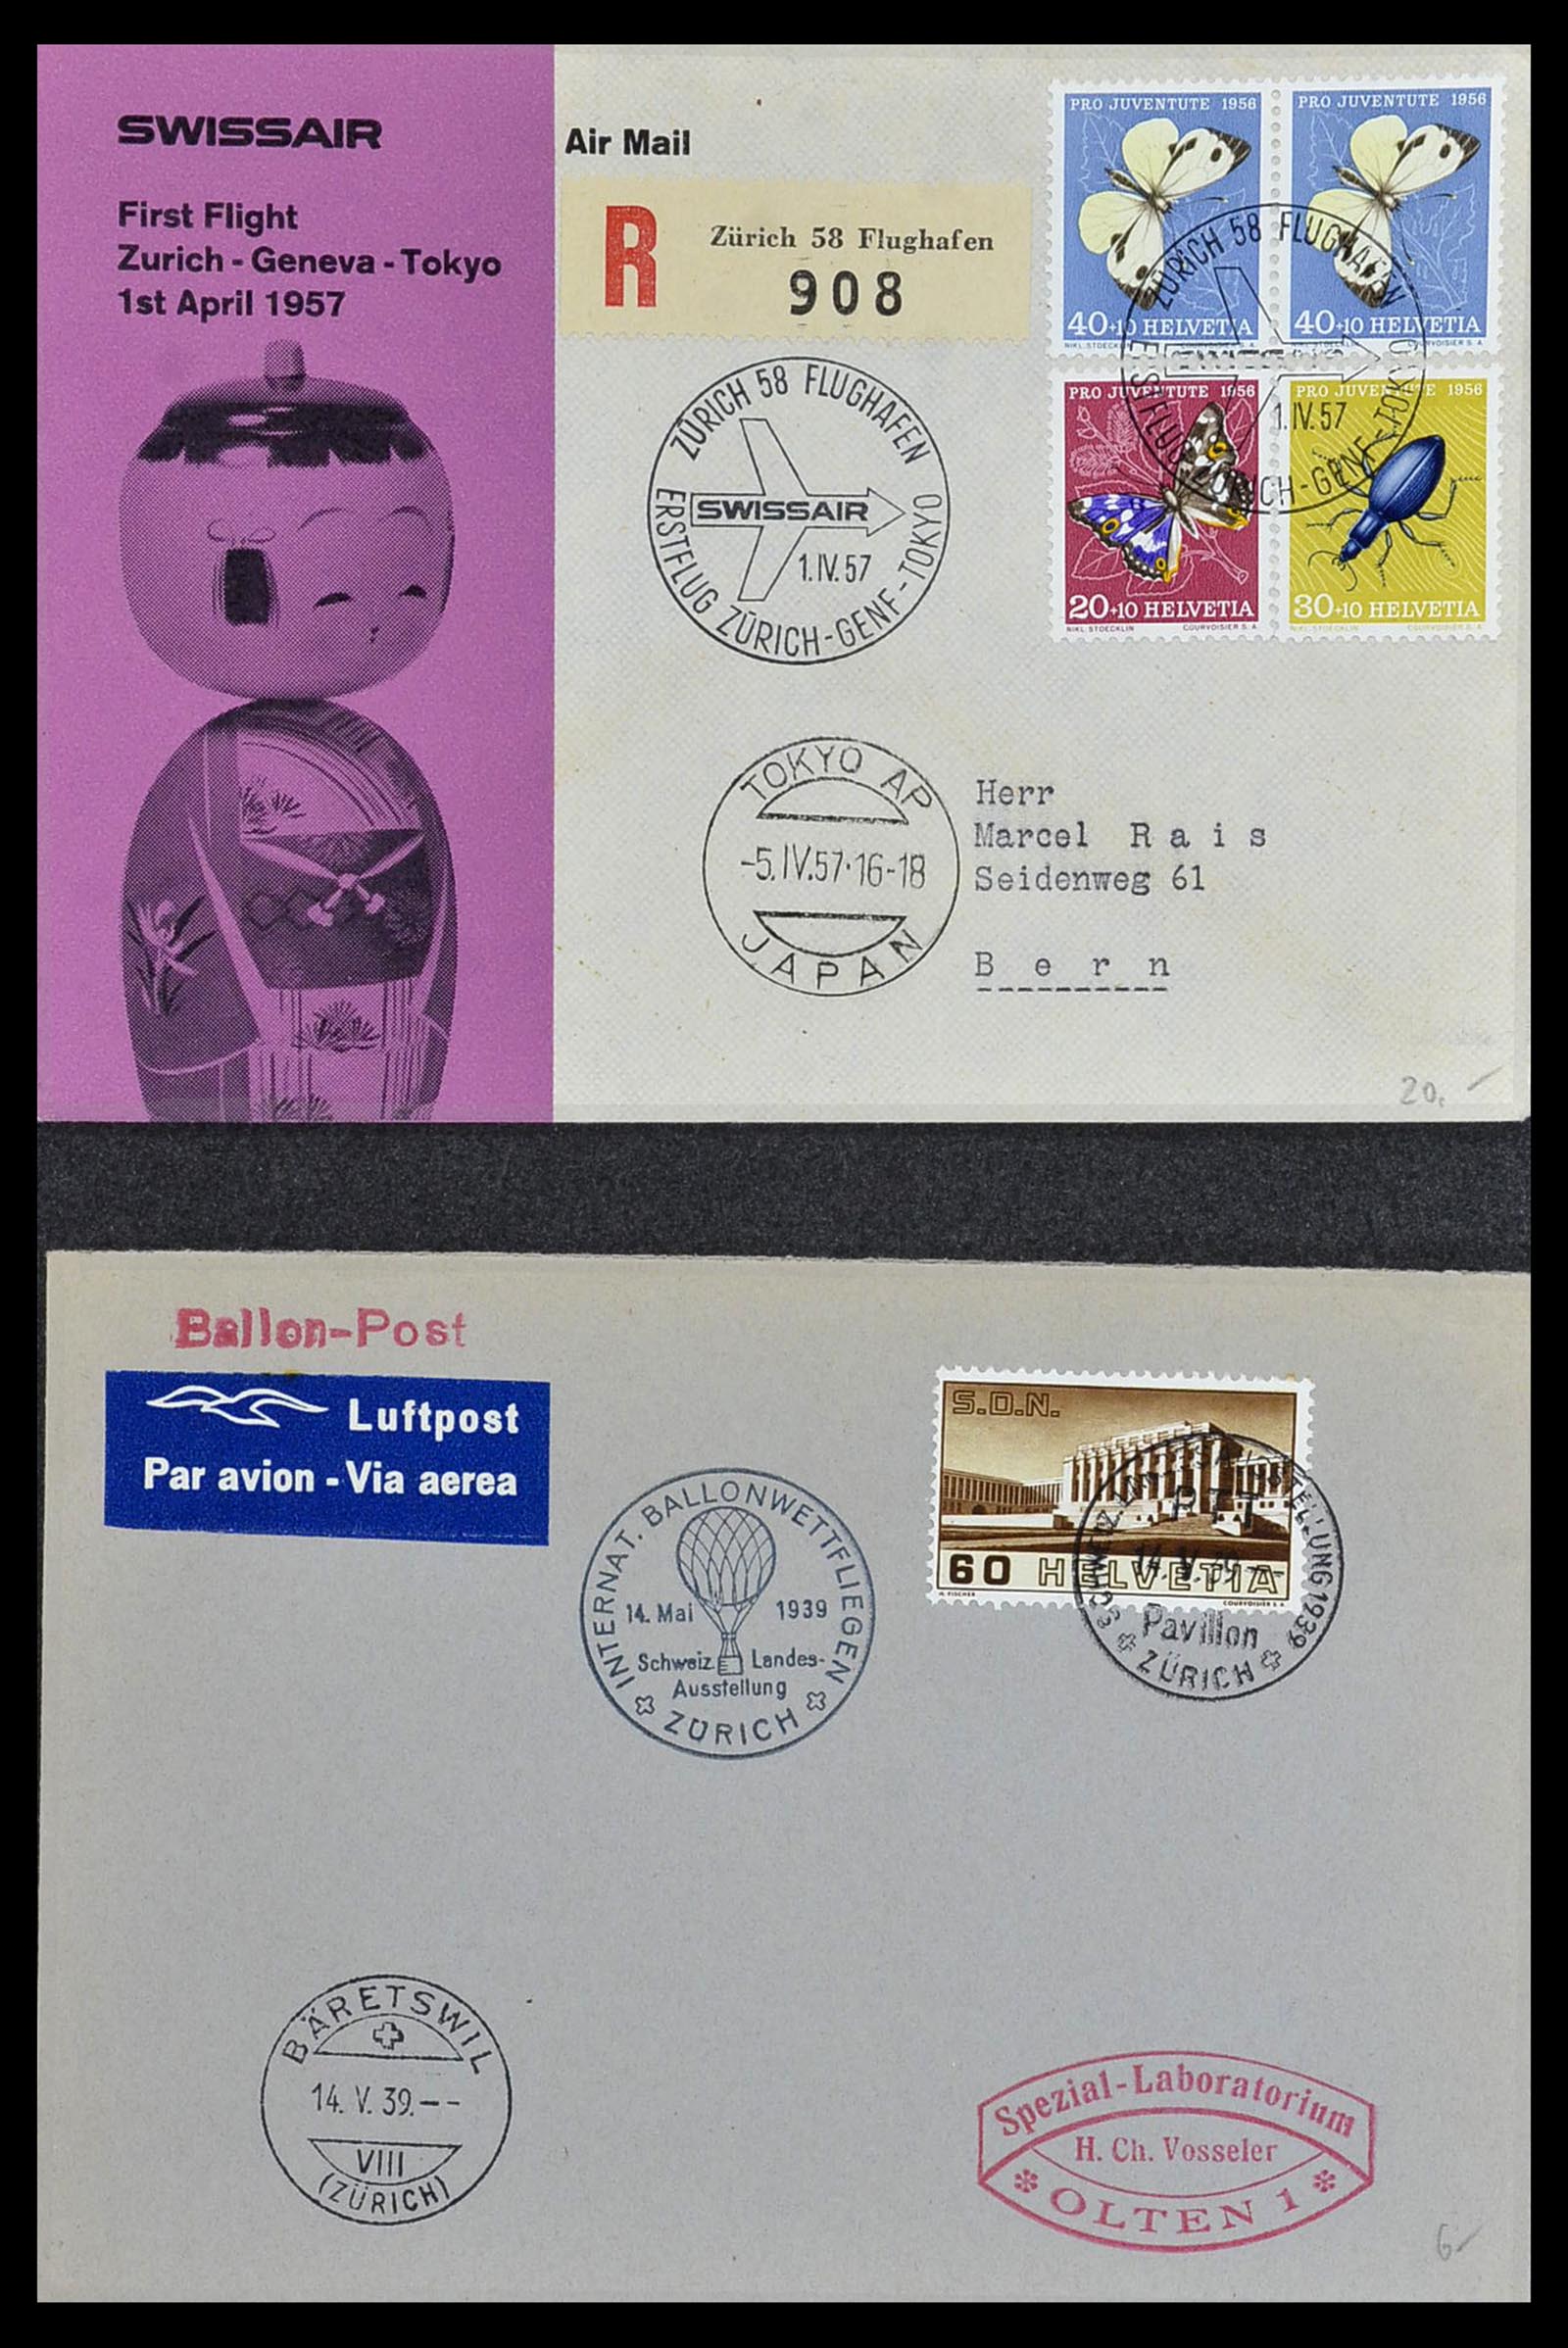 34141 075 - Stamp collection 34141 Switzerland airmail covers 1920-1960.